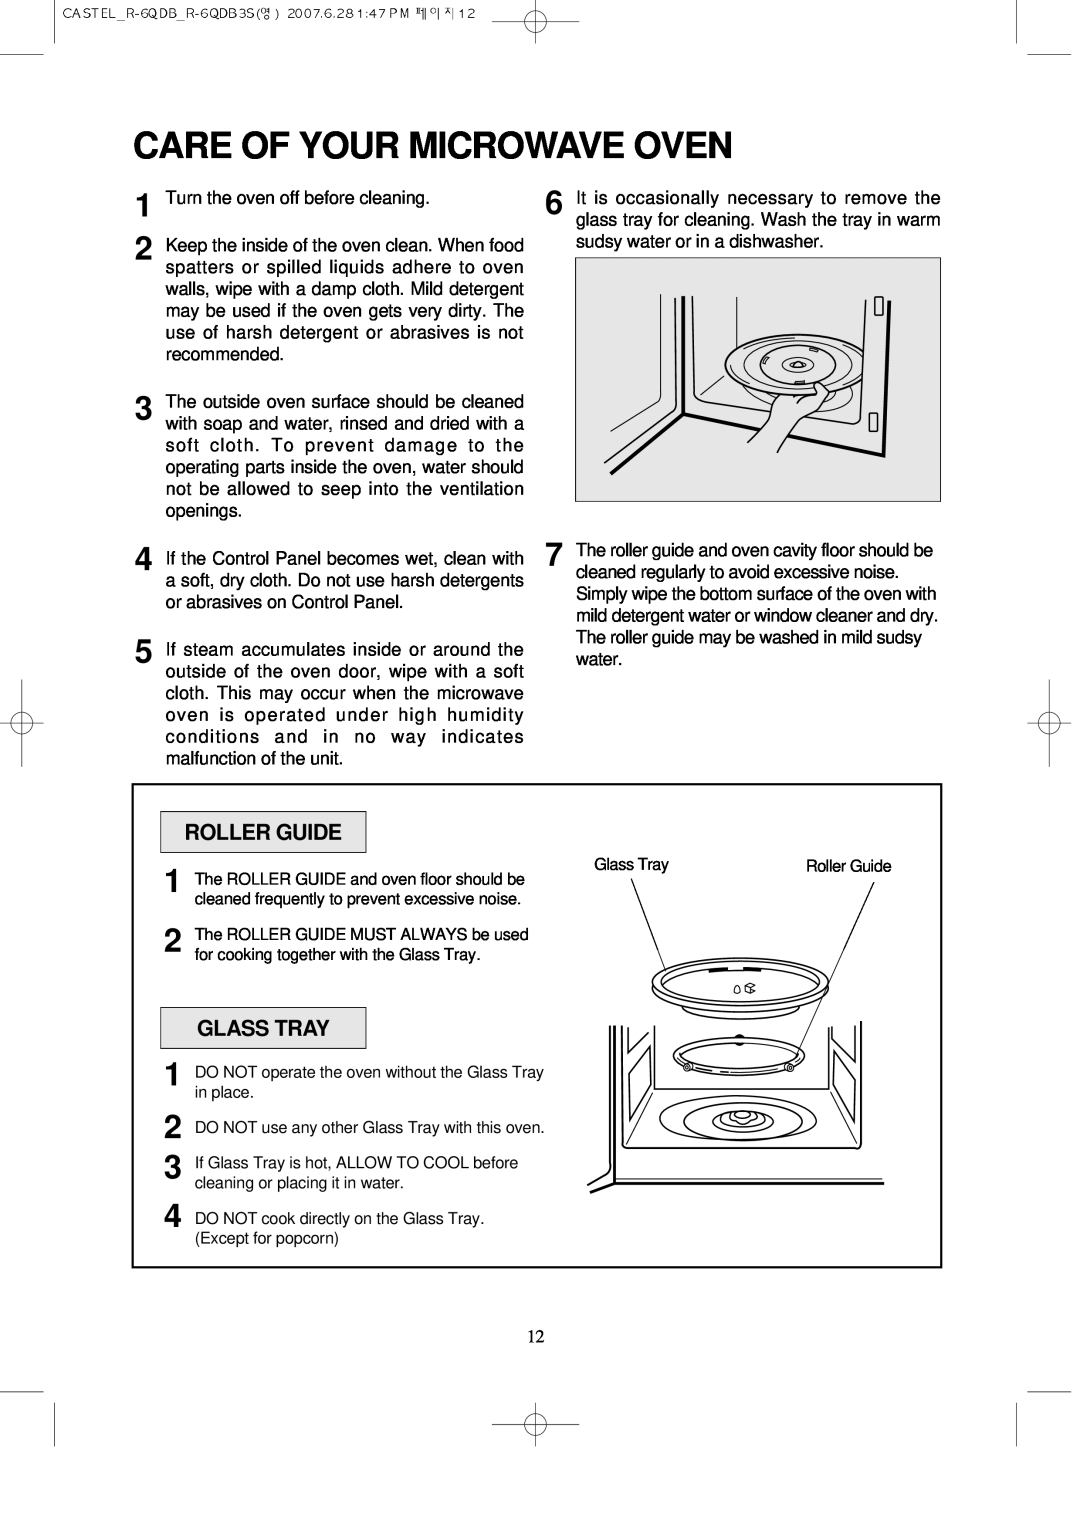 Daewoo KOR-6QDB manual Care Of Your Microwave Oven, Roller Guide, Glass Tray 